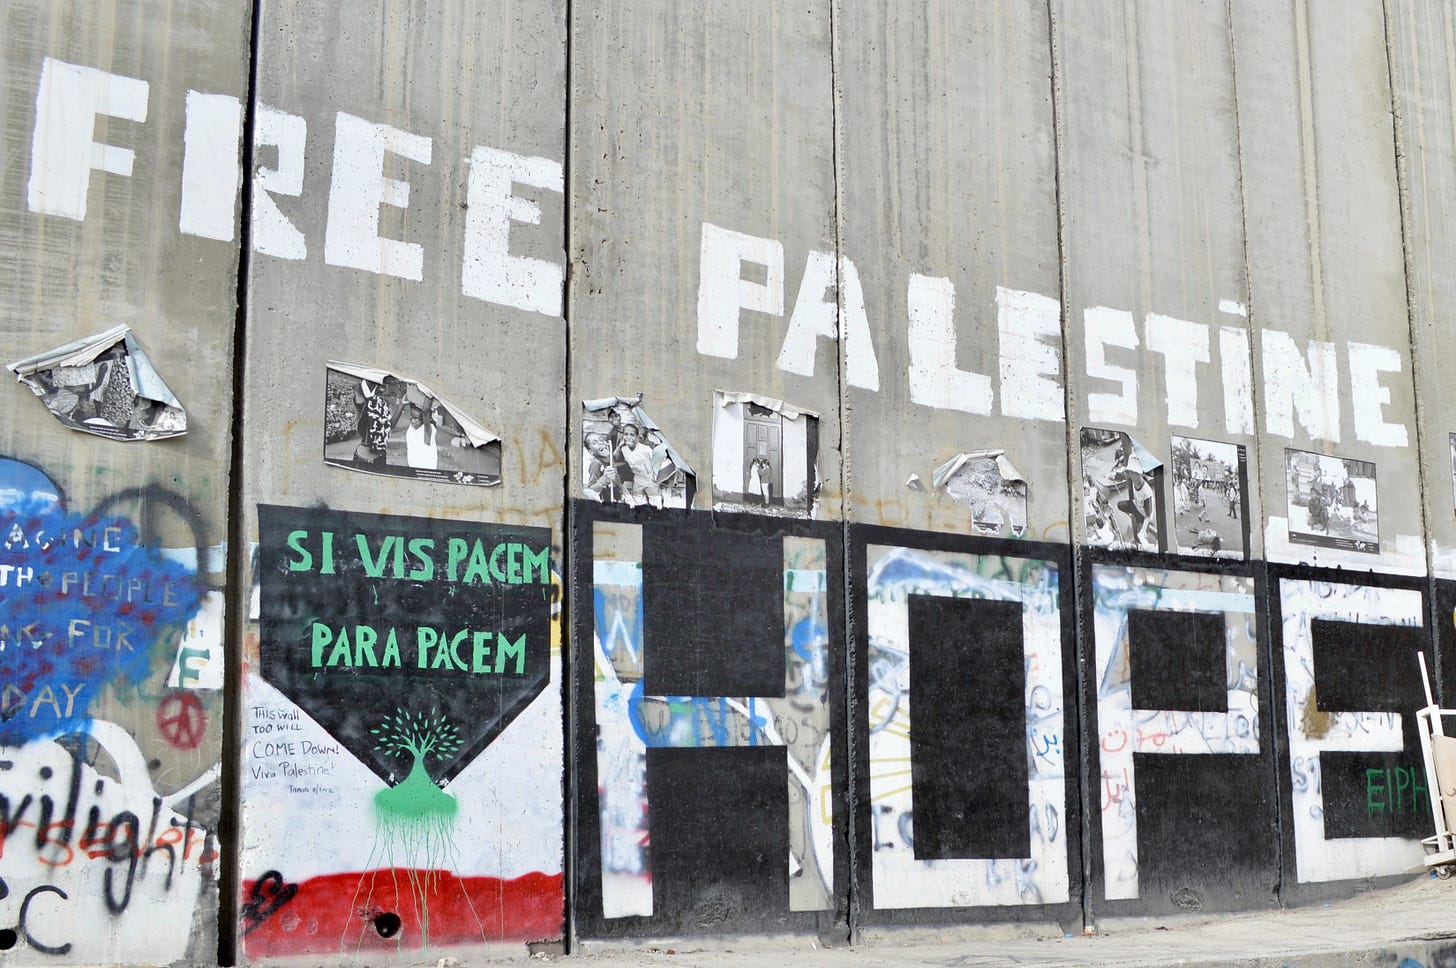 A concrete separation wall between Gaza and Israel that is full of graffiti that reads Free Palestine and Hope